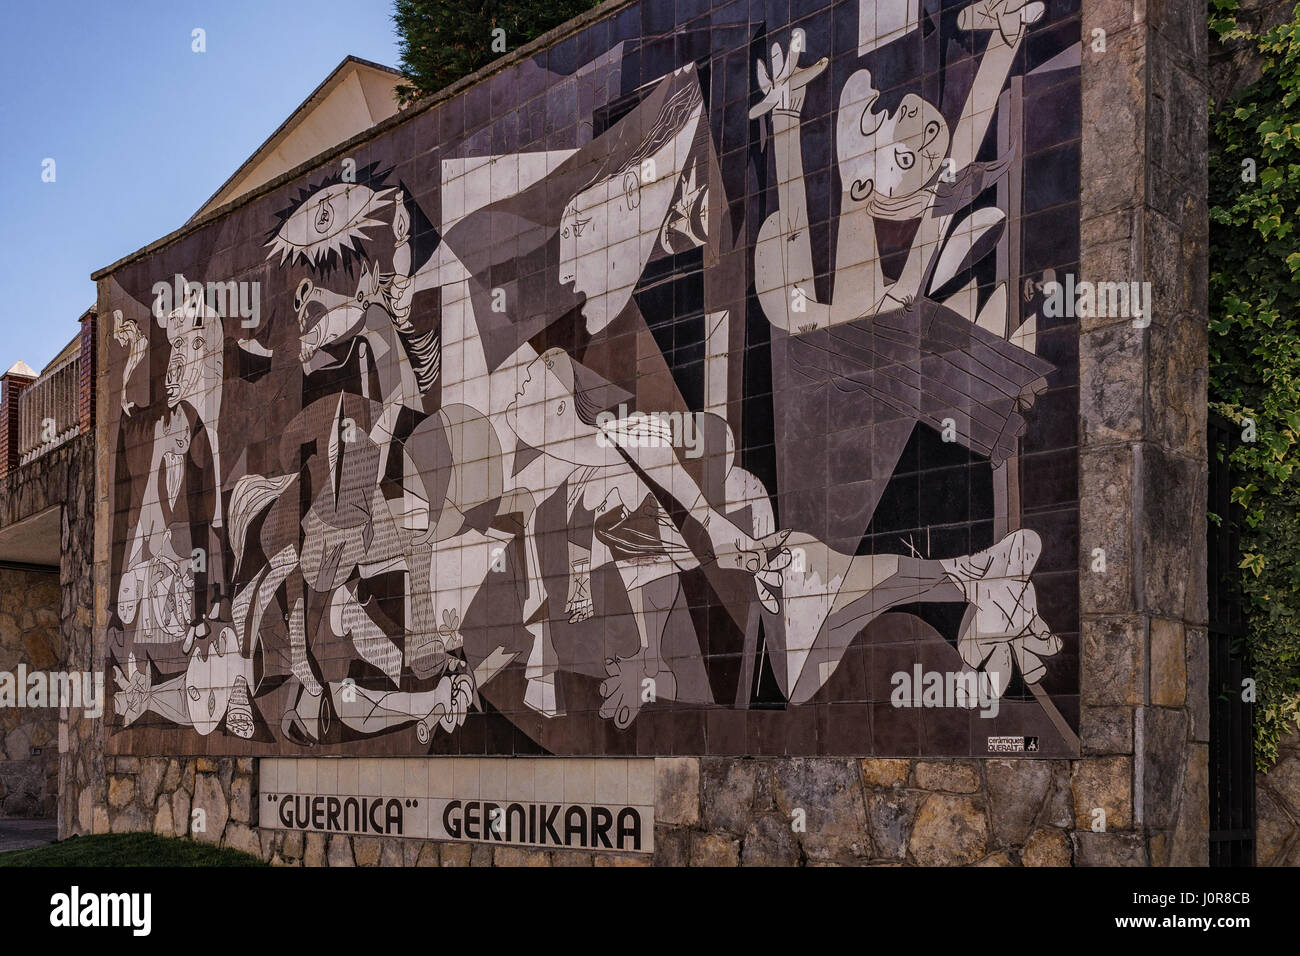 Mosaic, tile puzzle, for the reproduction of the painting of the Guernica by Pablo Picasso, in the town of Guernica Lumo, Bizkaia, Pais Vasco, Spain Stock Photo